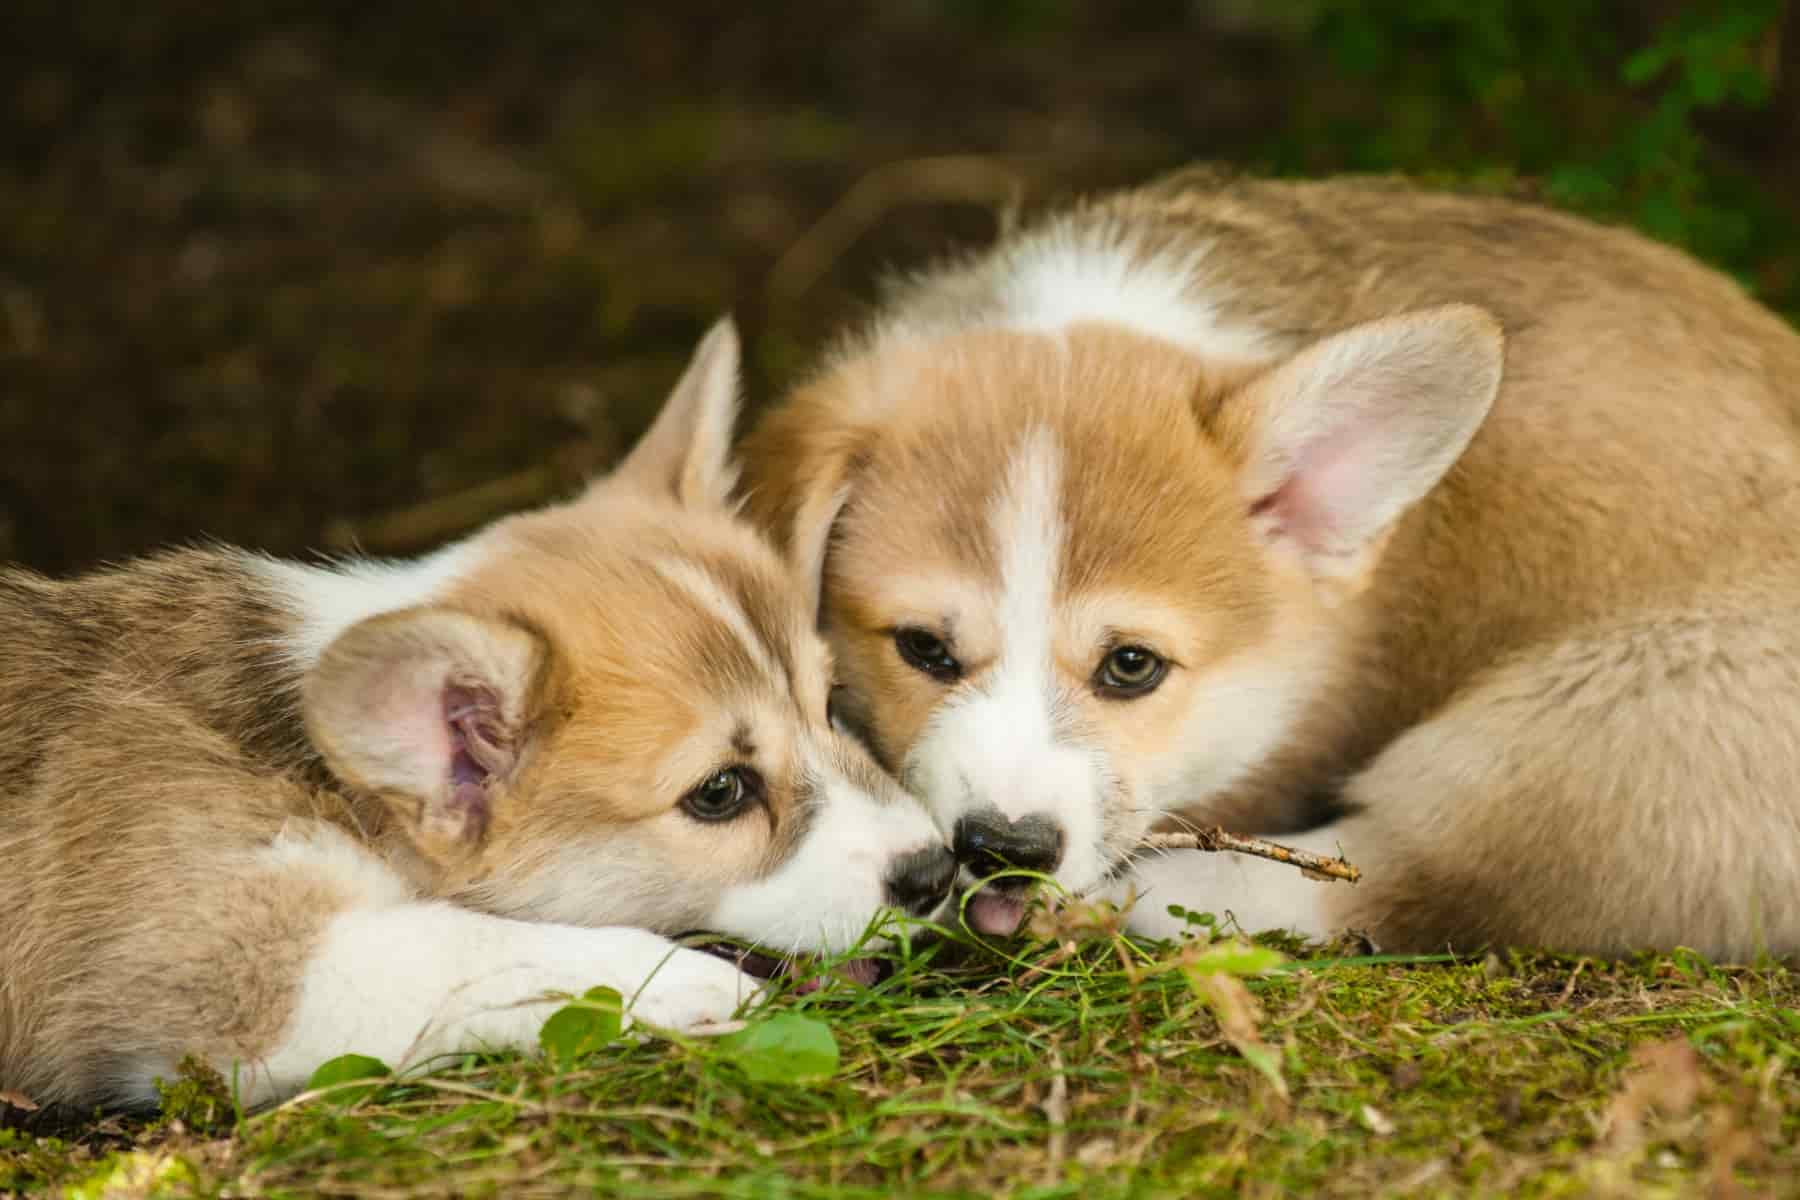 Do you know how to socialise your corgi? These two social corgis are laying with each other on the ground.